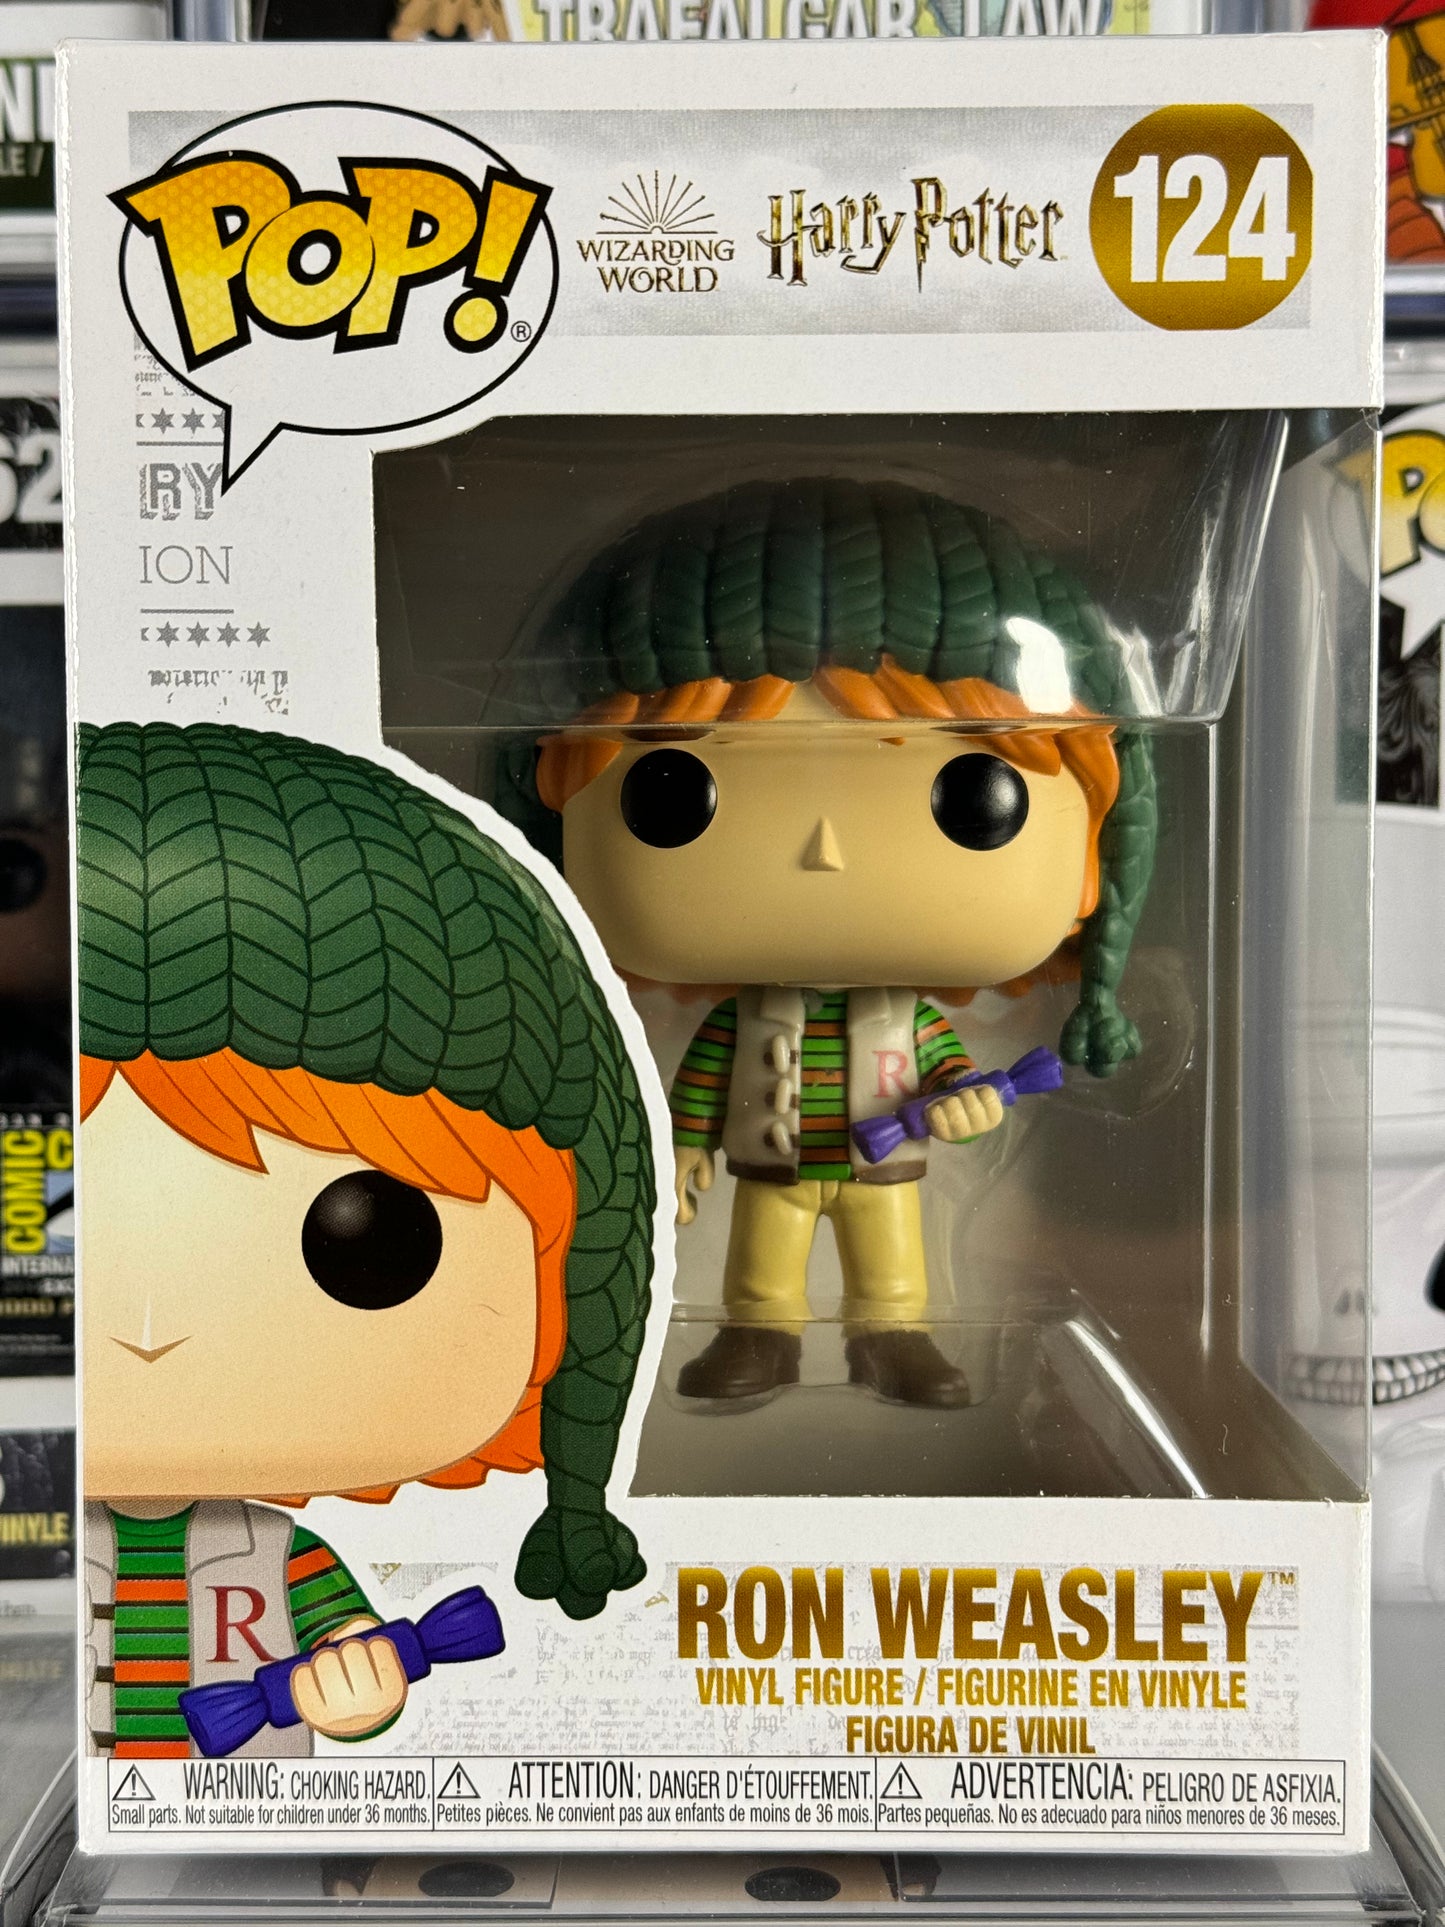 Wizarding World of Harry Potter - Ron Weasley (Holiday) (124)